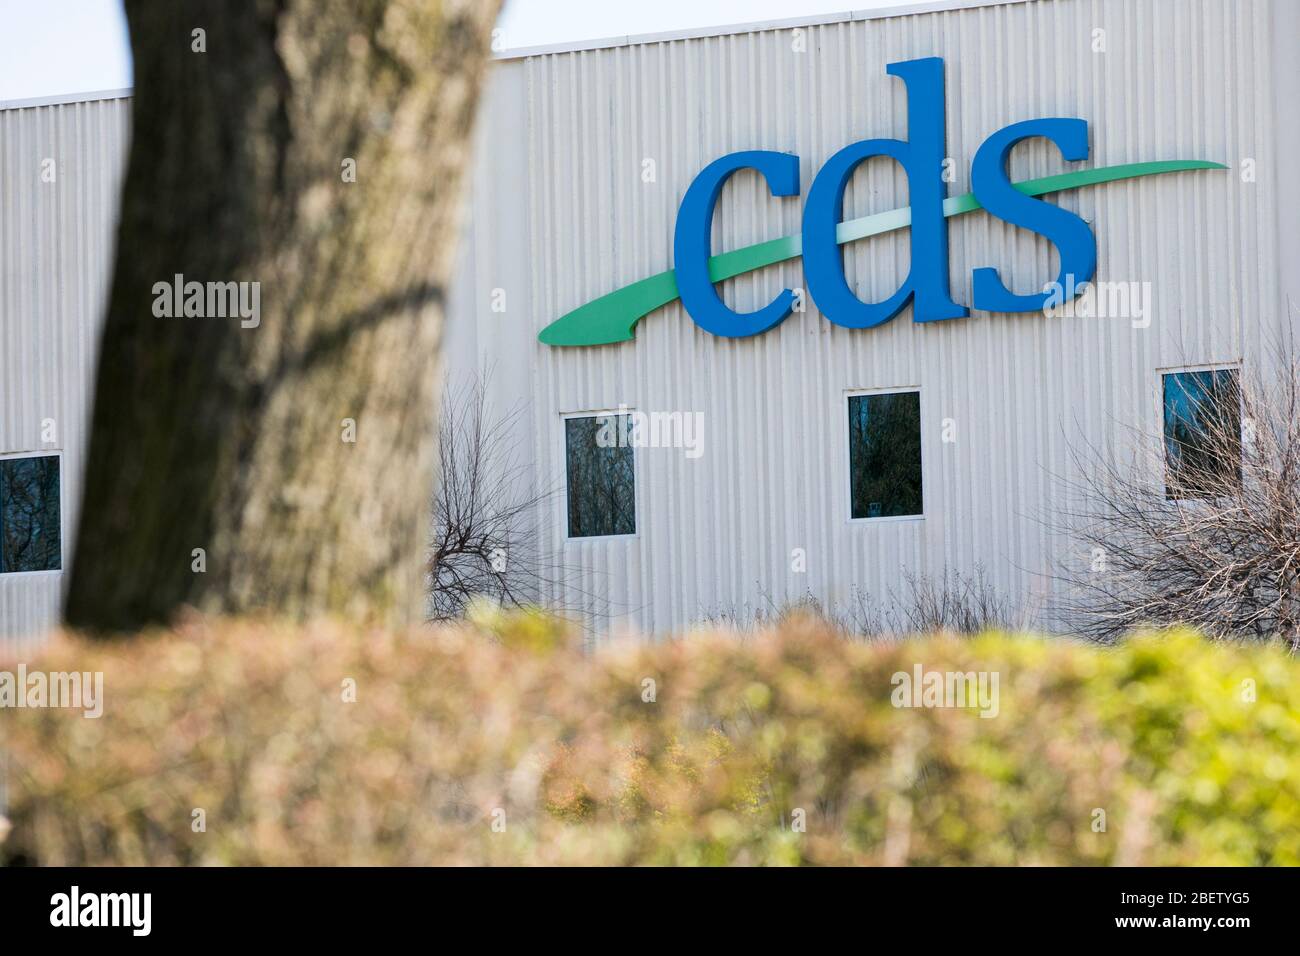 A logo sign outside of the headquarters of Computer Data Source (CDS) in Eatontown, New Jersey on April 11, 2020. Stock Photo